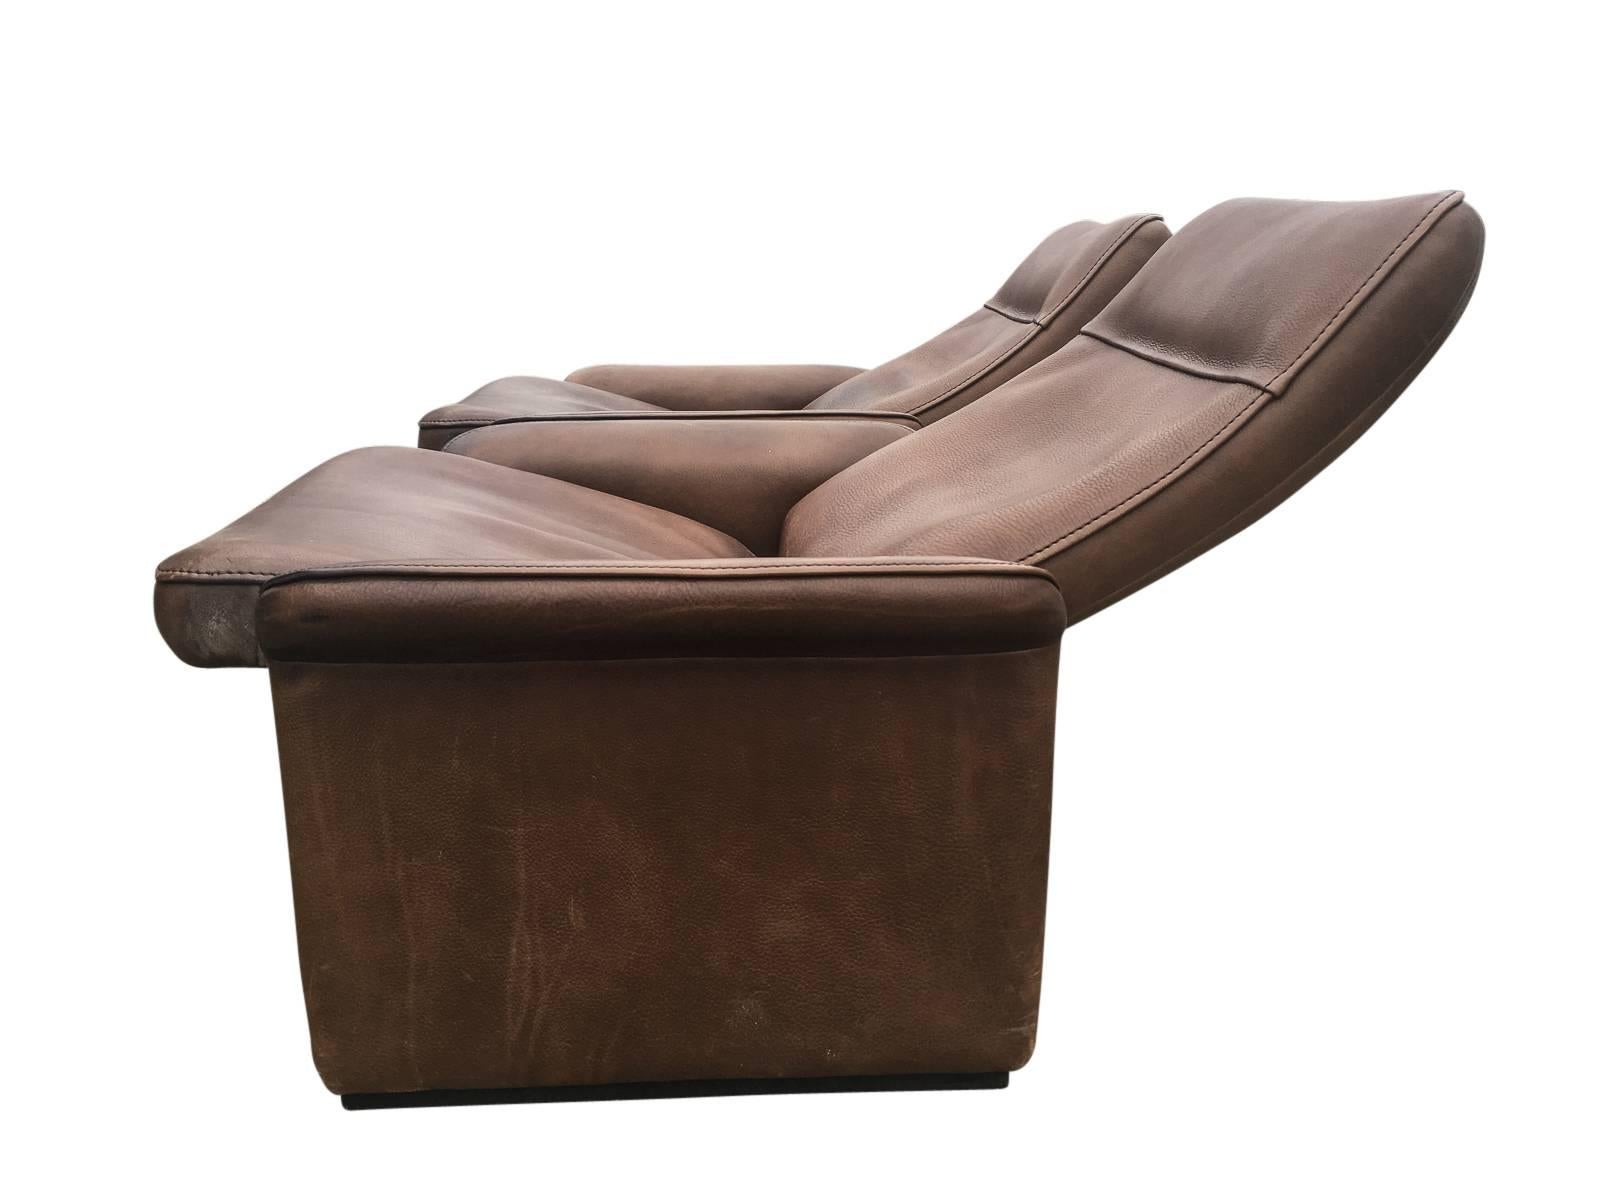 Pair of Leather Lounge Chairs Manufactured by De Sede, Switzerland 1